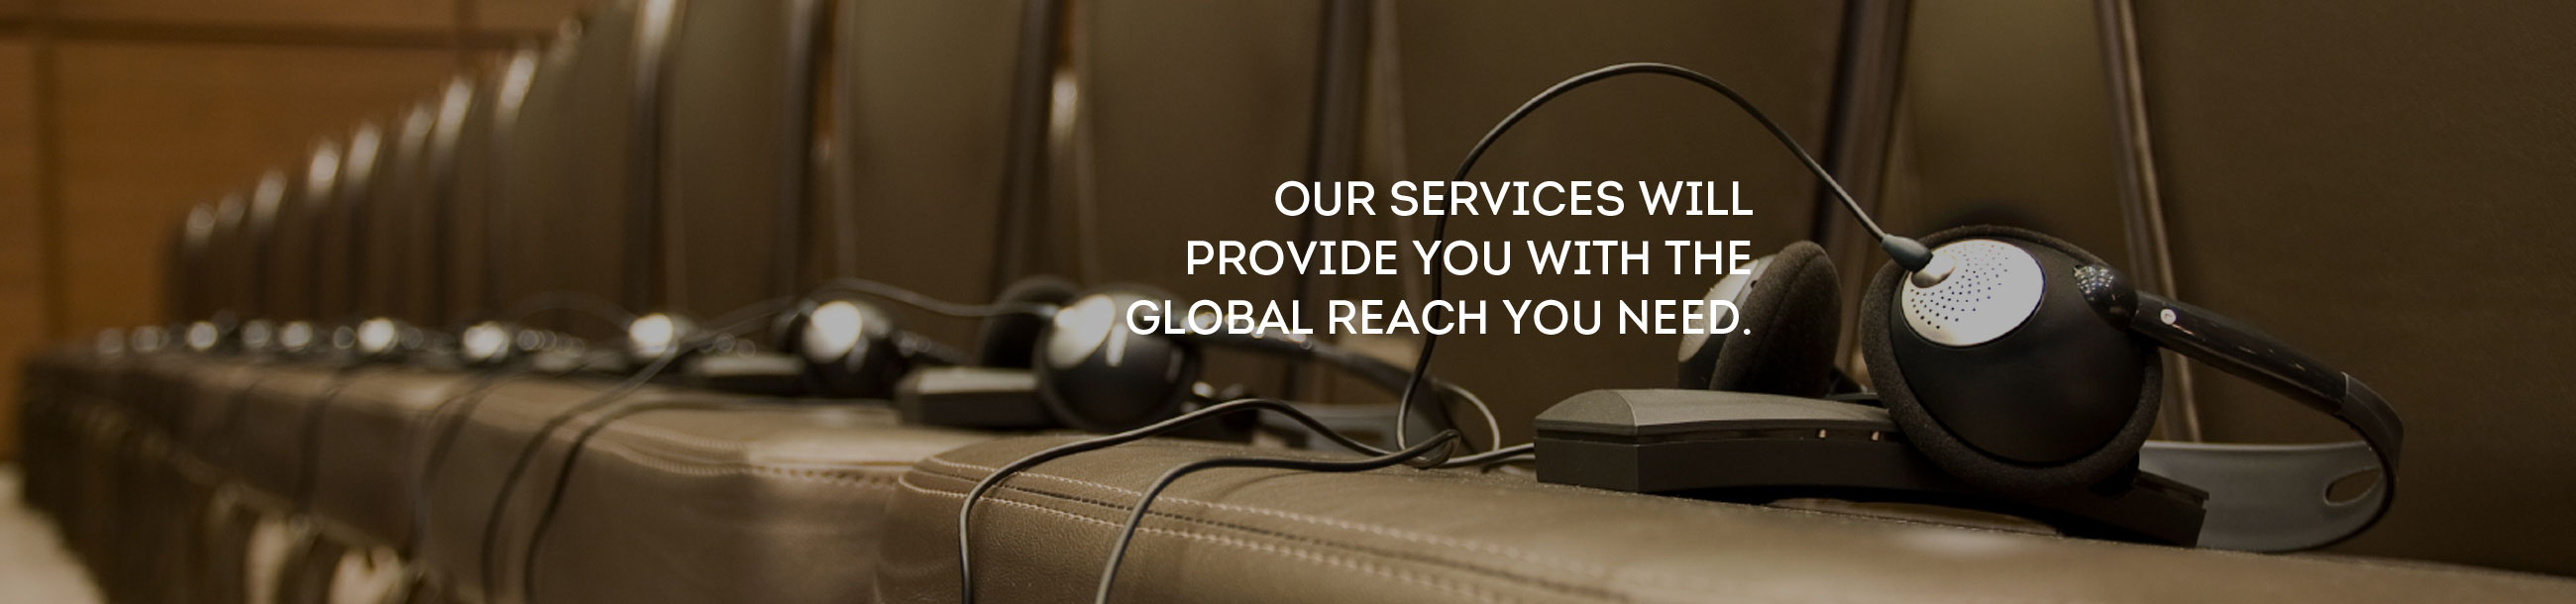 Our Services Will Provide Your With Global Reach You Need